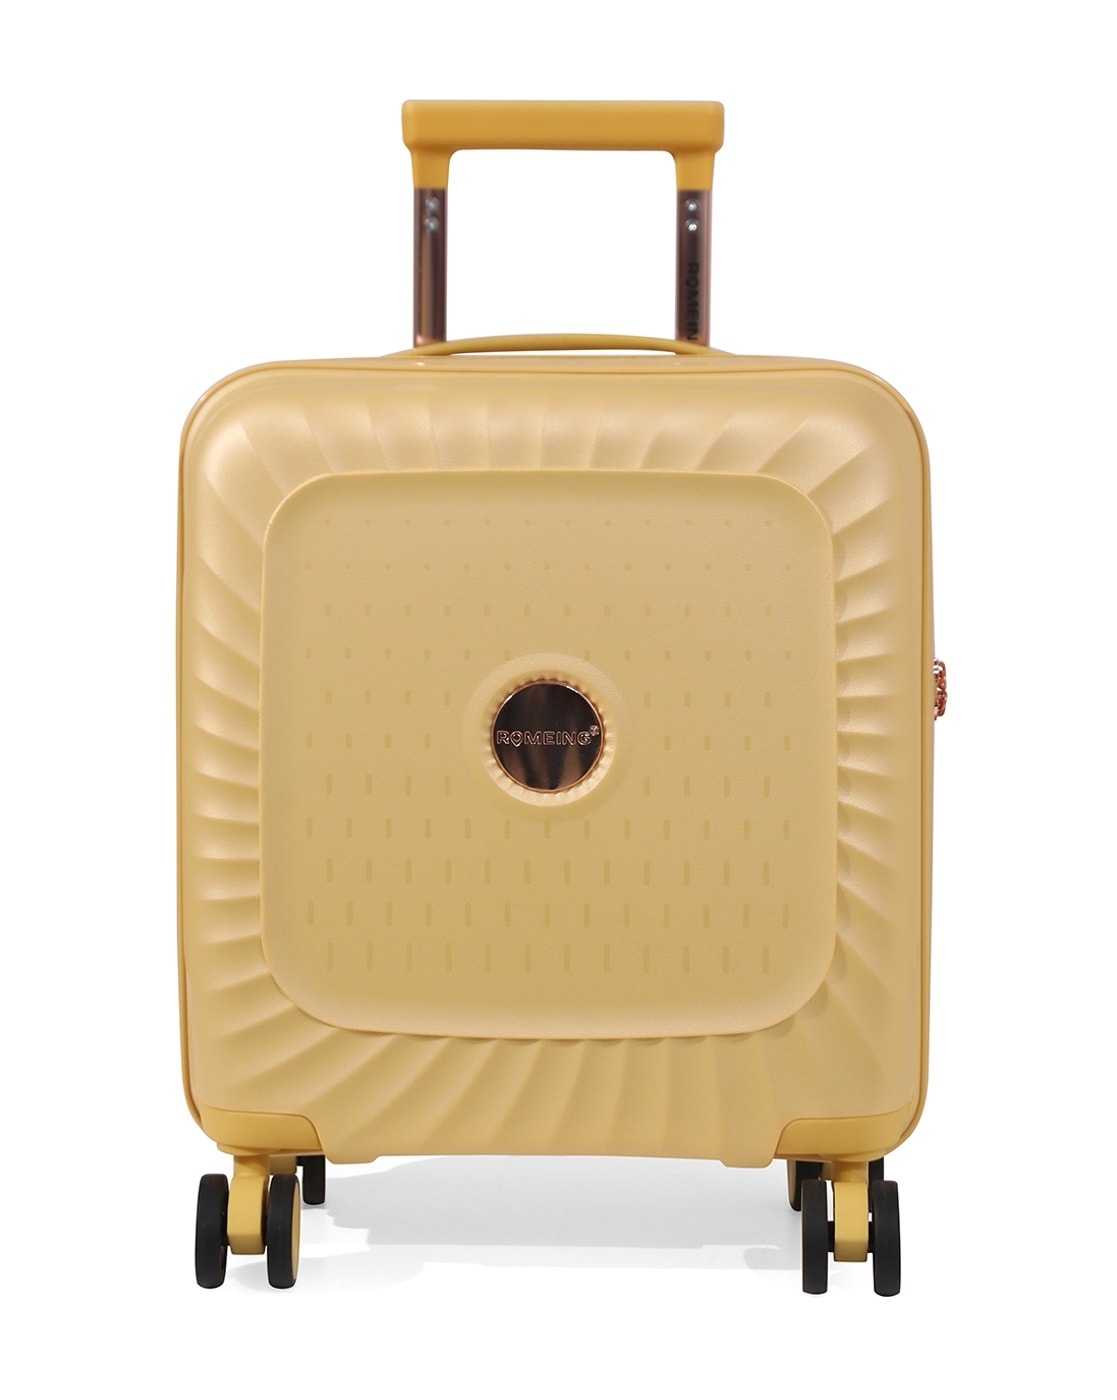 ROMEING Tuscany Set Of 3 Coral Red Textured Hard Sided Polypropylene  Trolley Suitcase Price in India, Full Specifications & Offers | DTashion.com